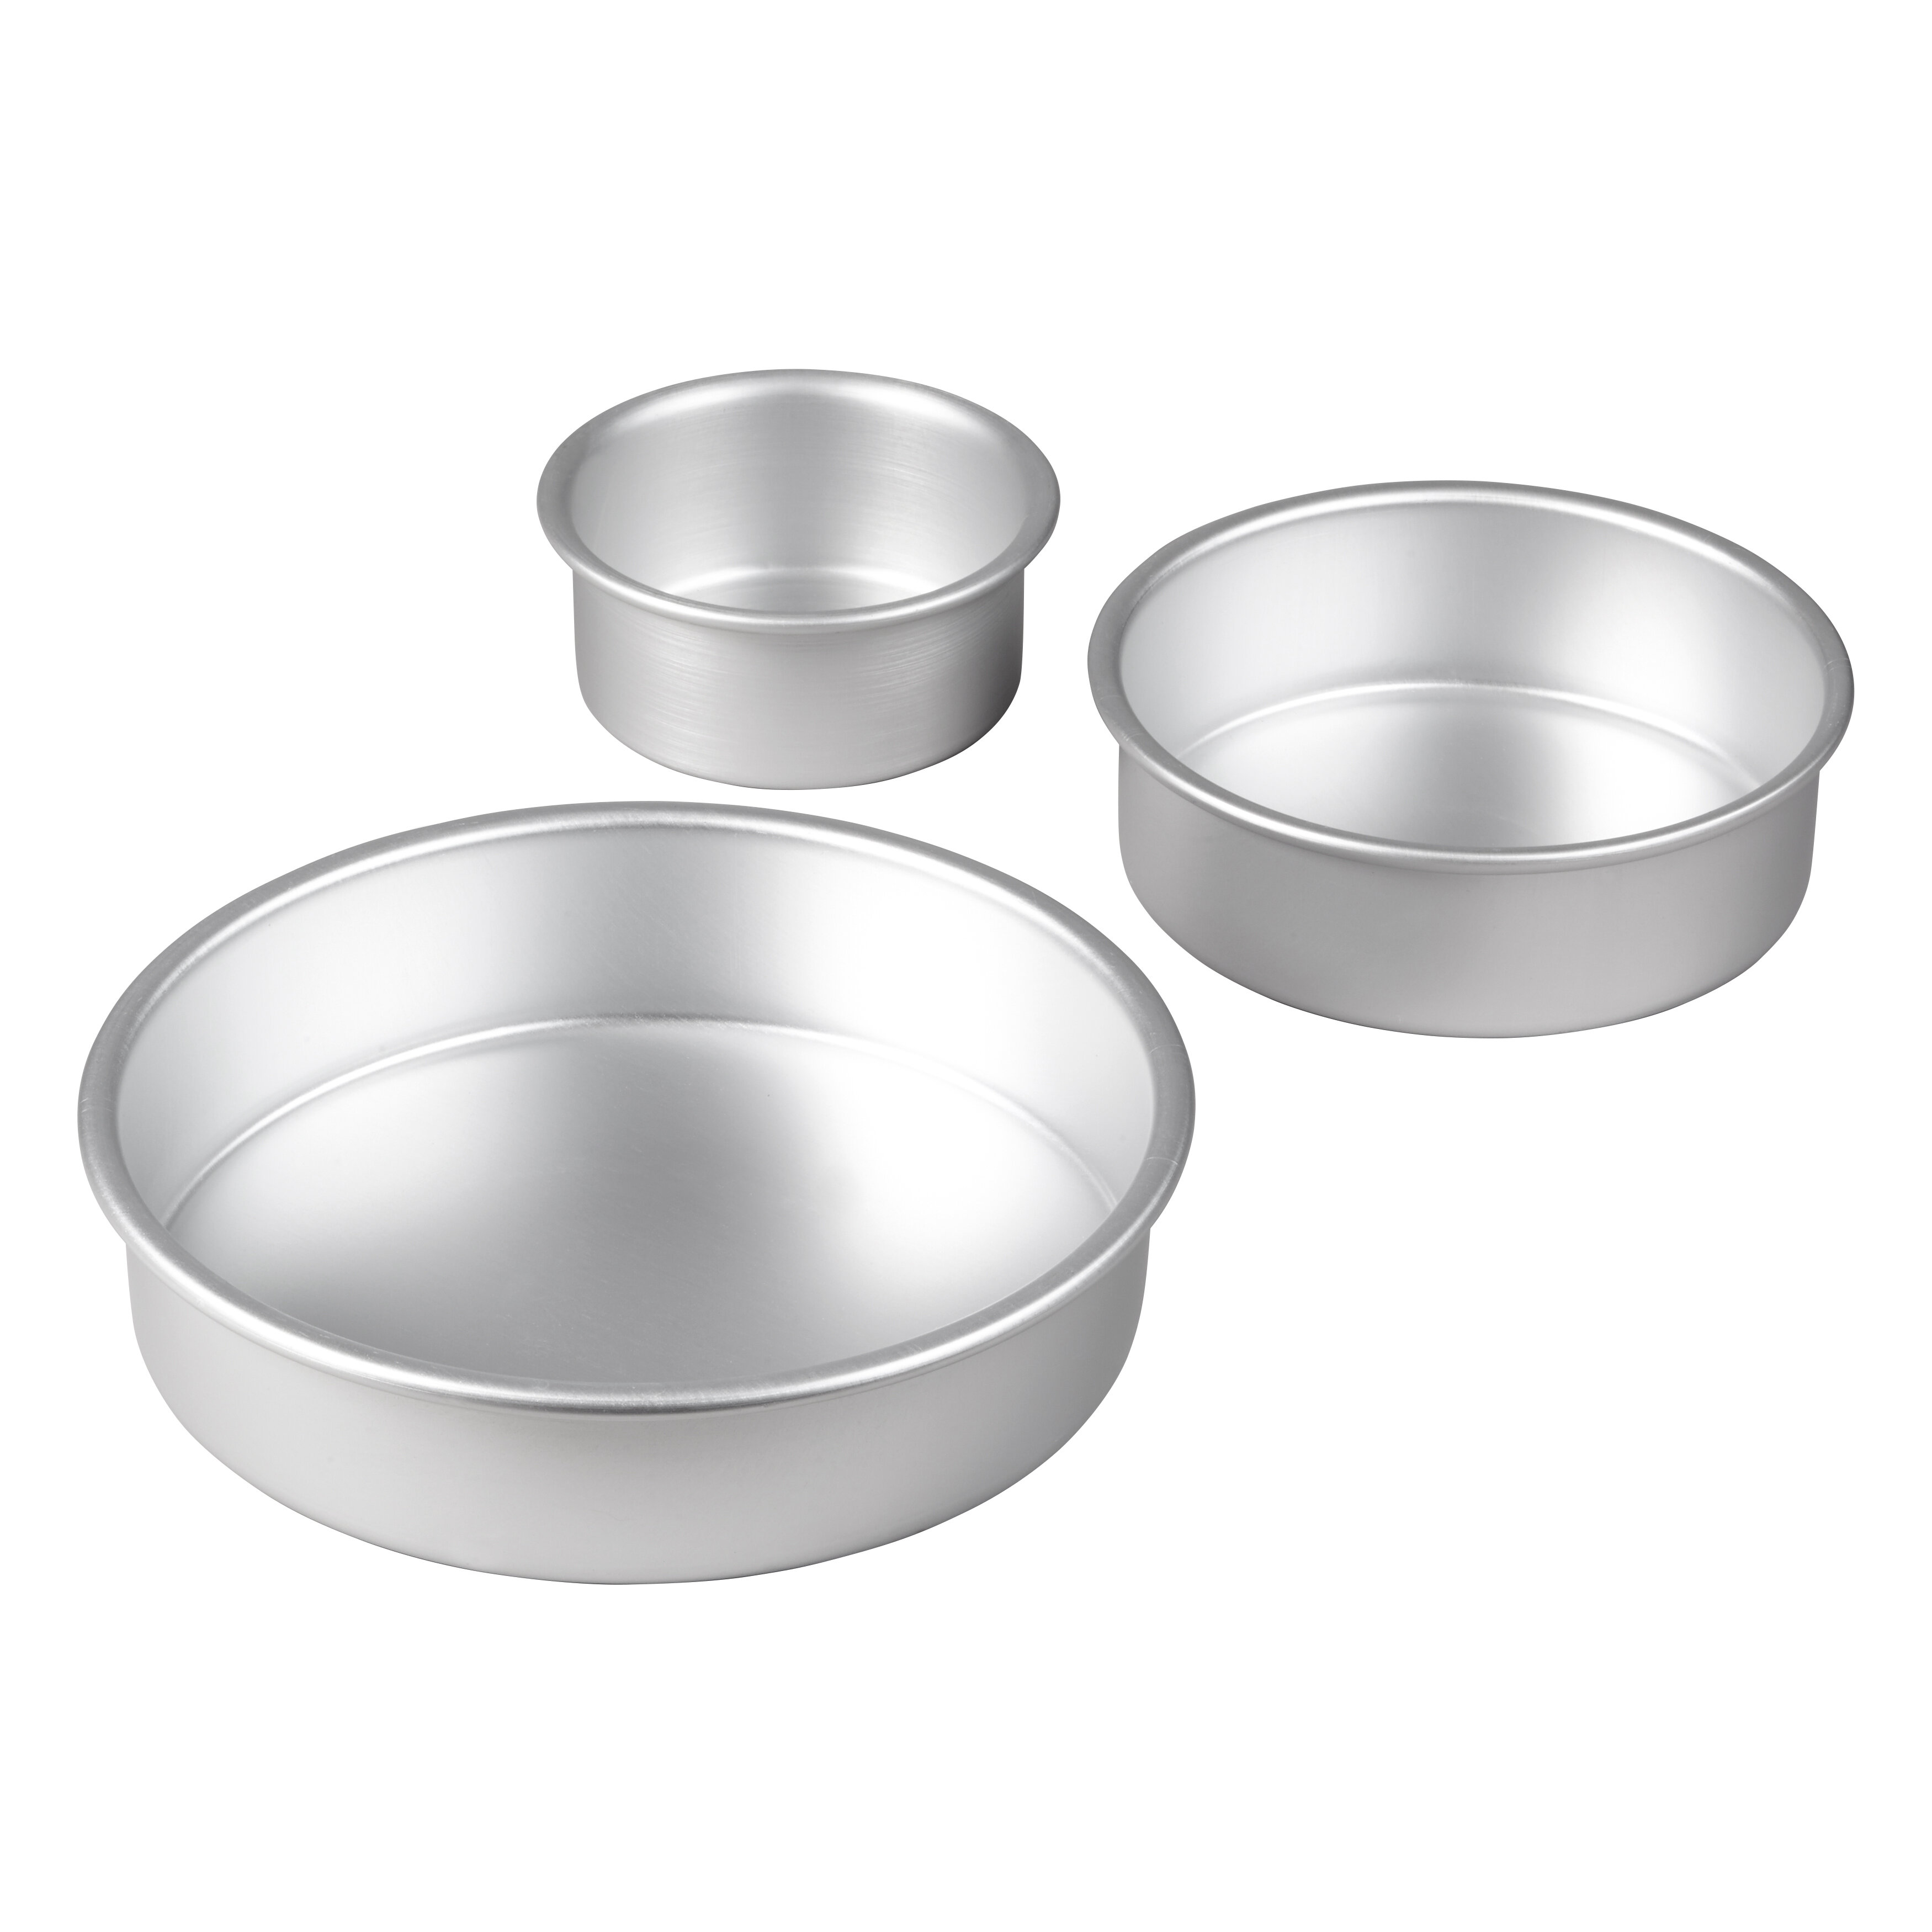 Wilton Small and Tall Aluminum 2 x 6-inch Layer Cake Pan Set 2- Piece